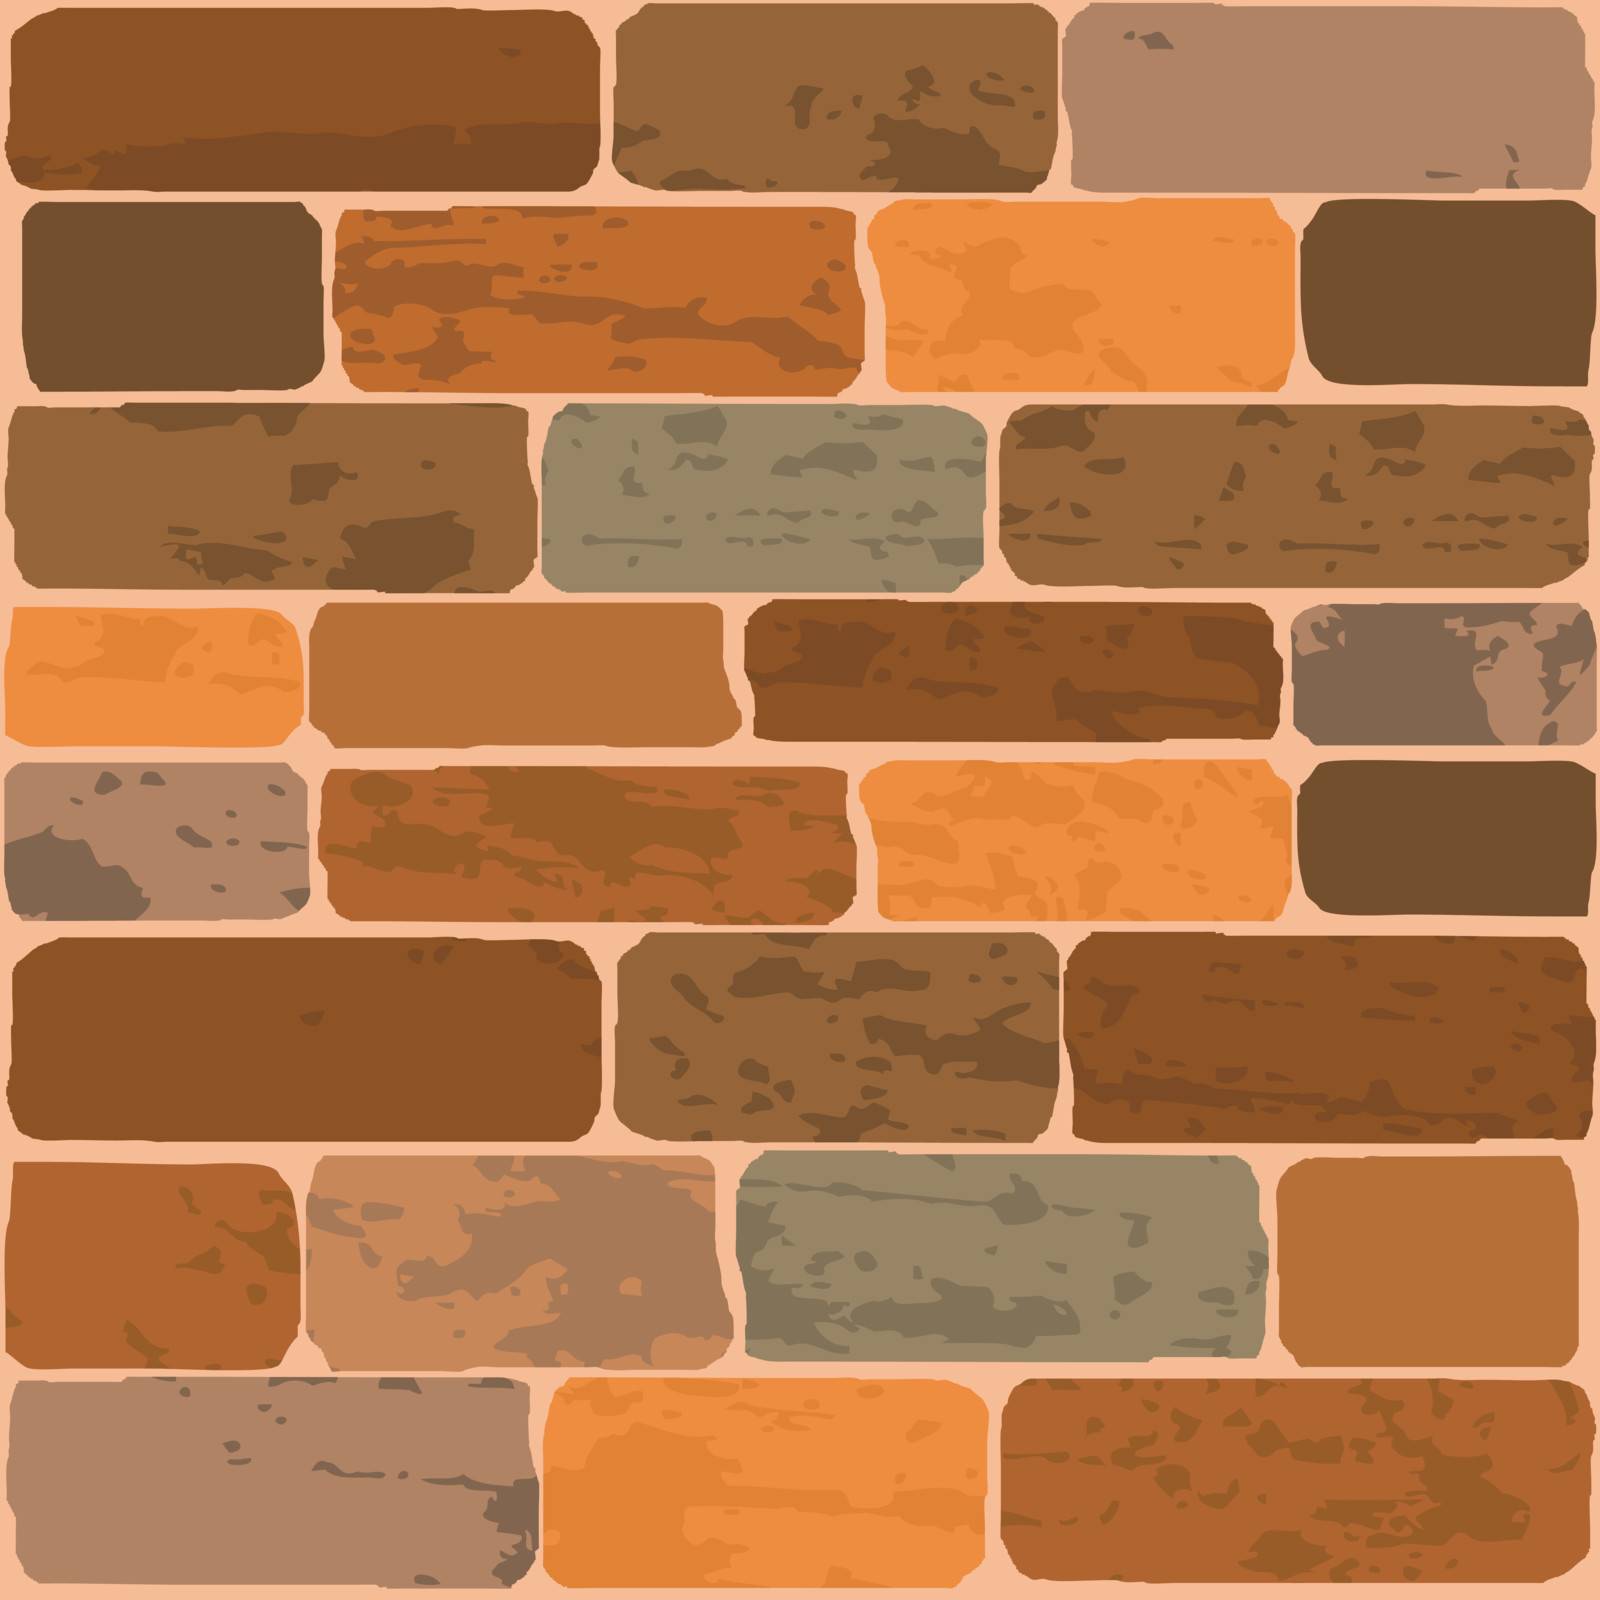 Vector illustration of a brick wall by Larser